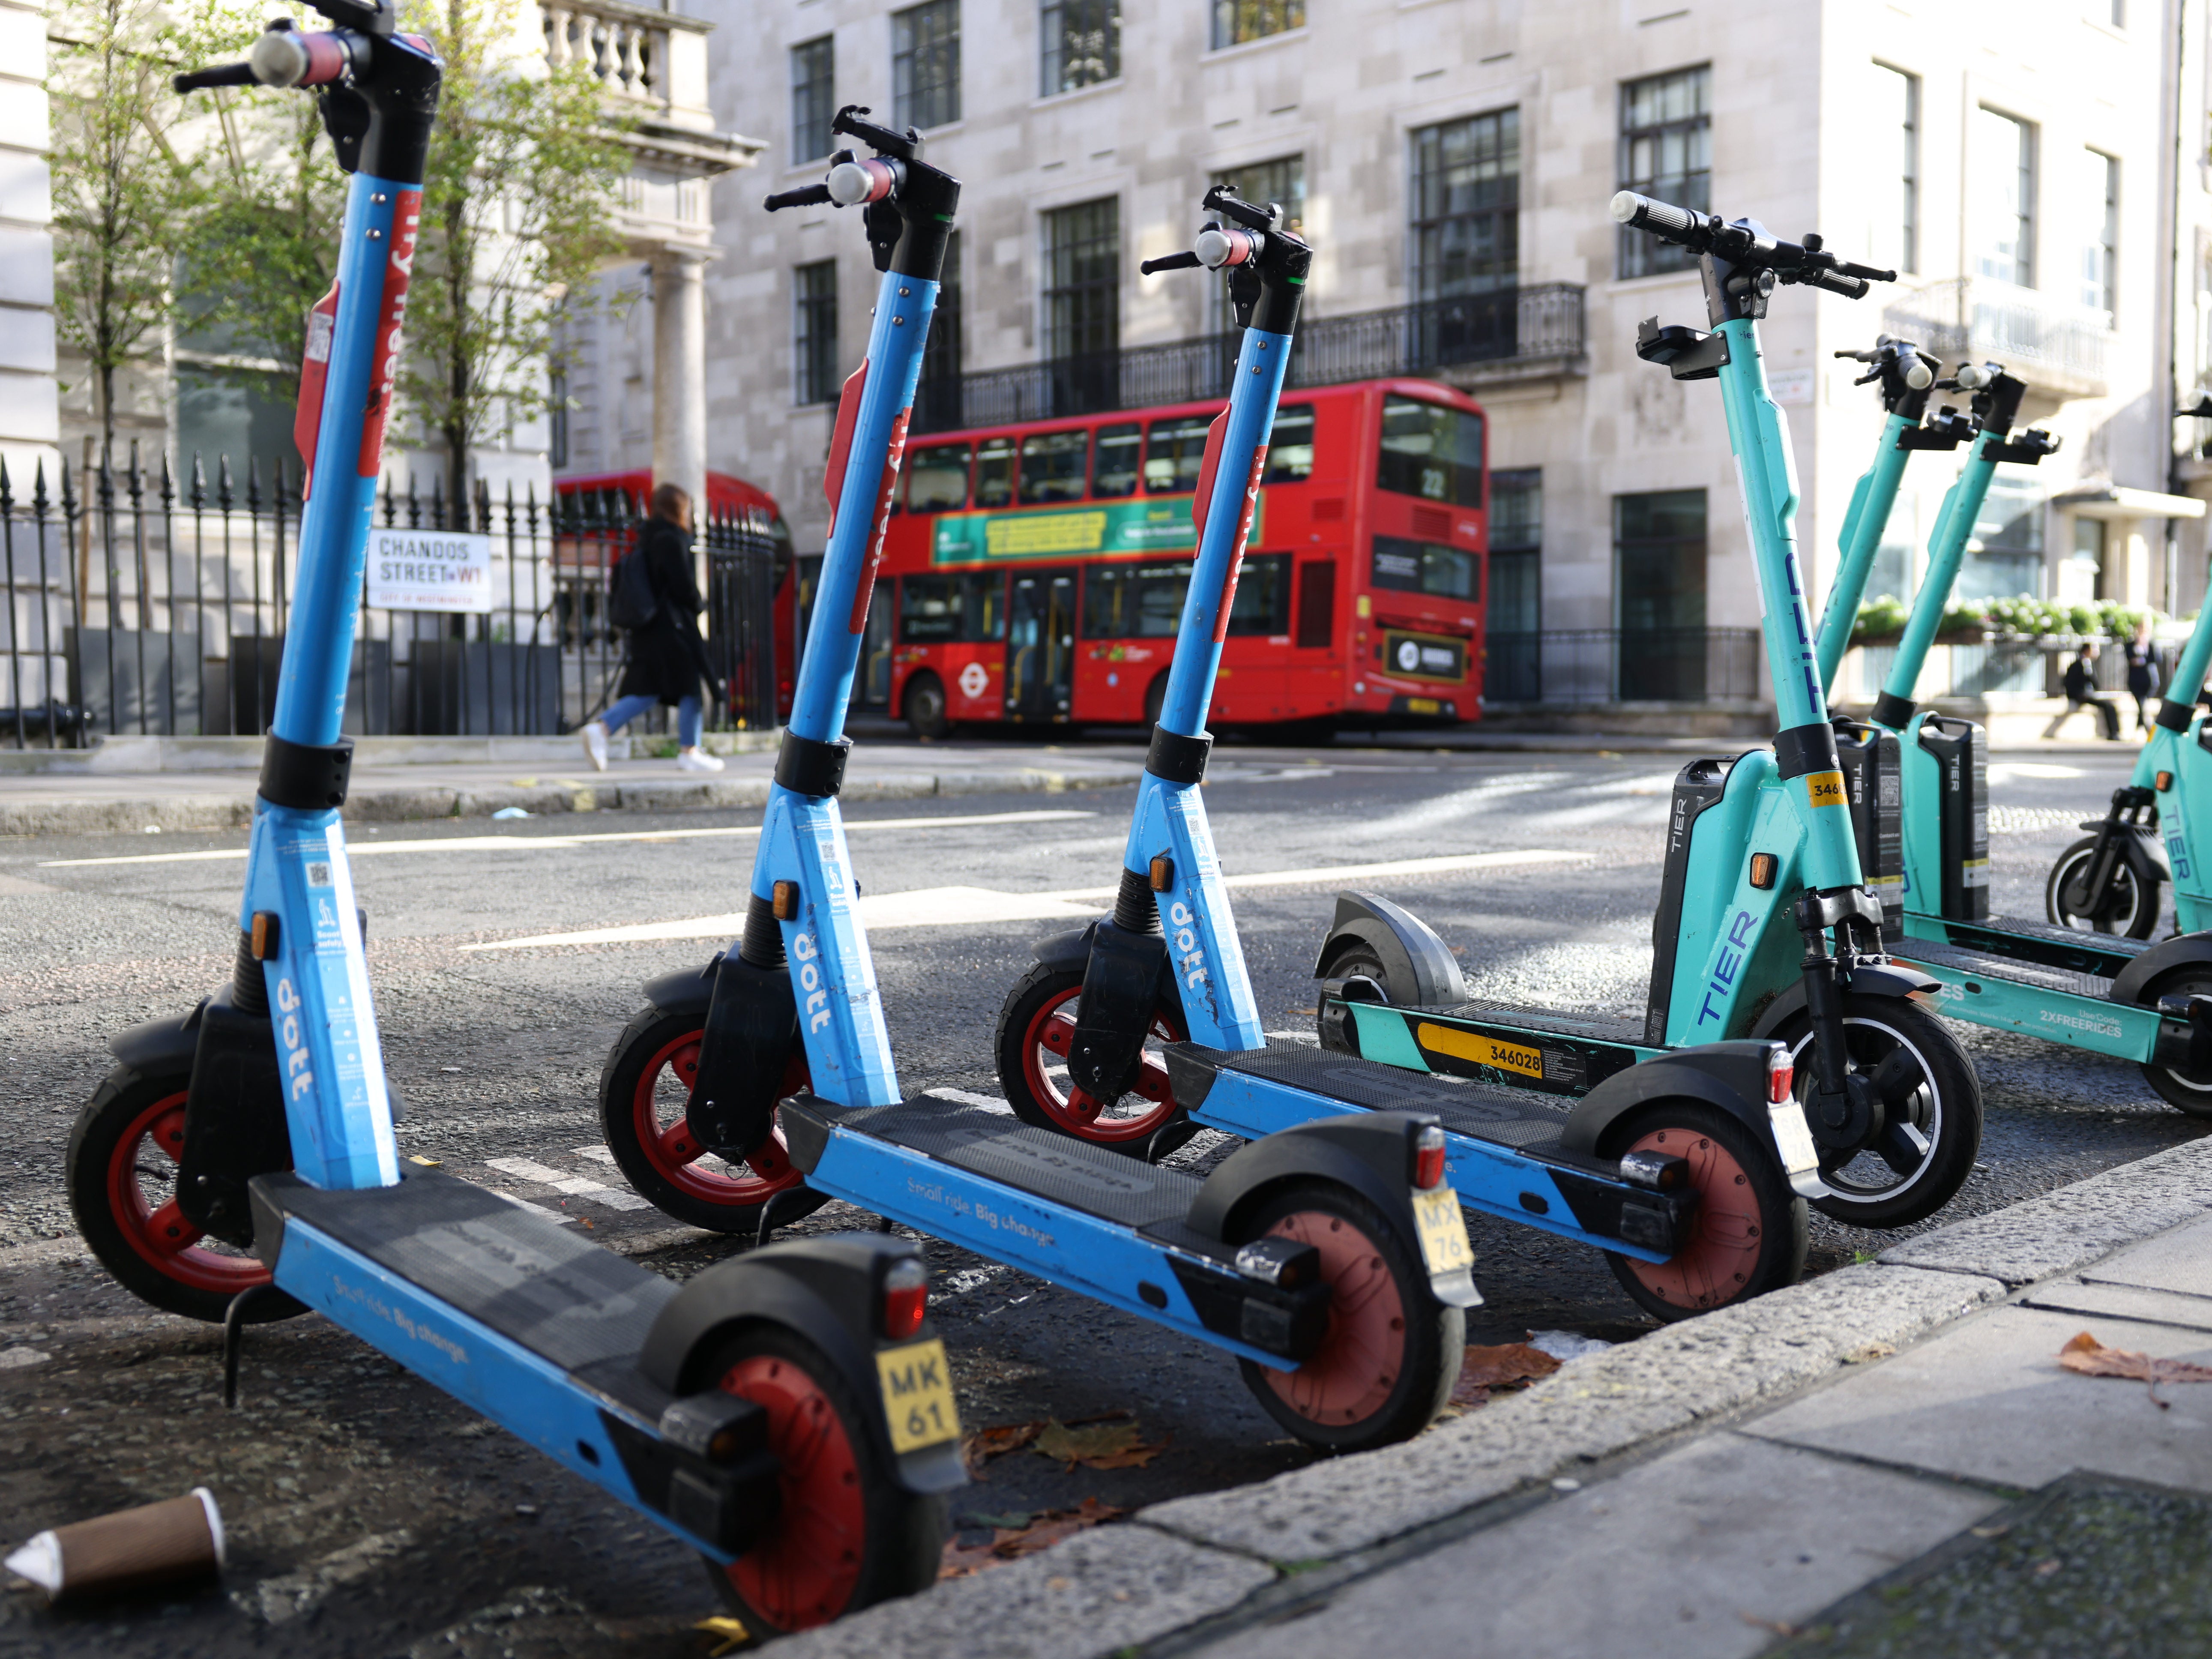 Trials of e-scooter rental schemes are under way across the UK